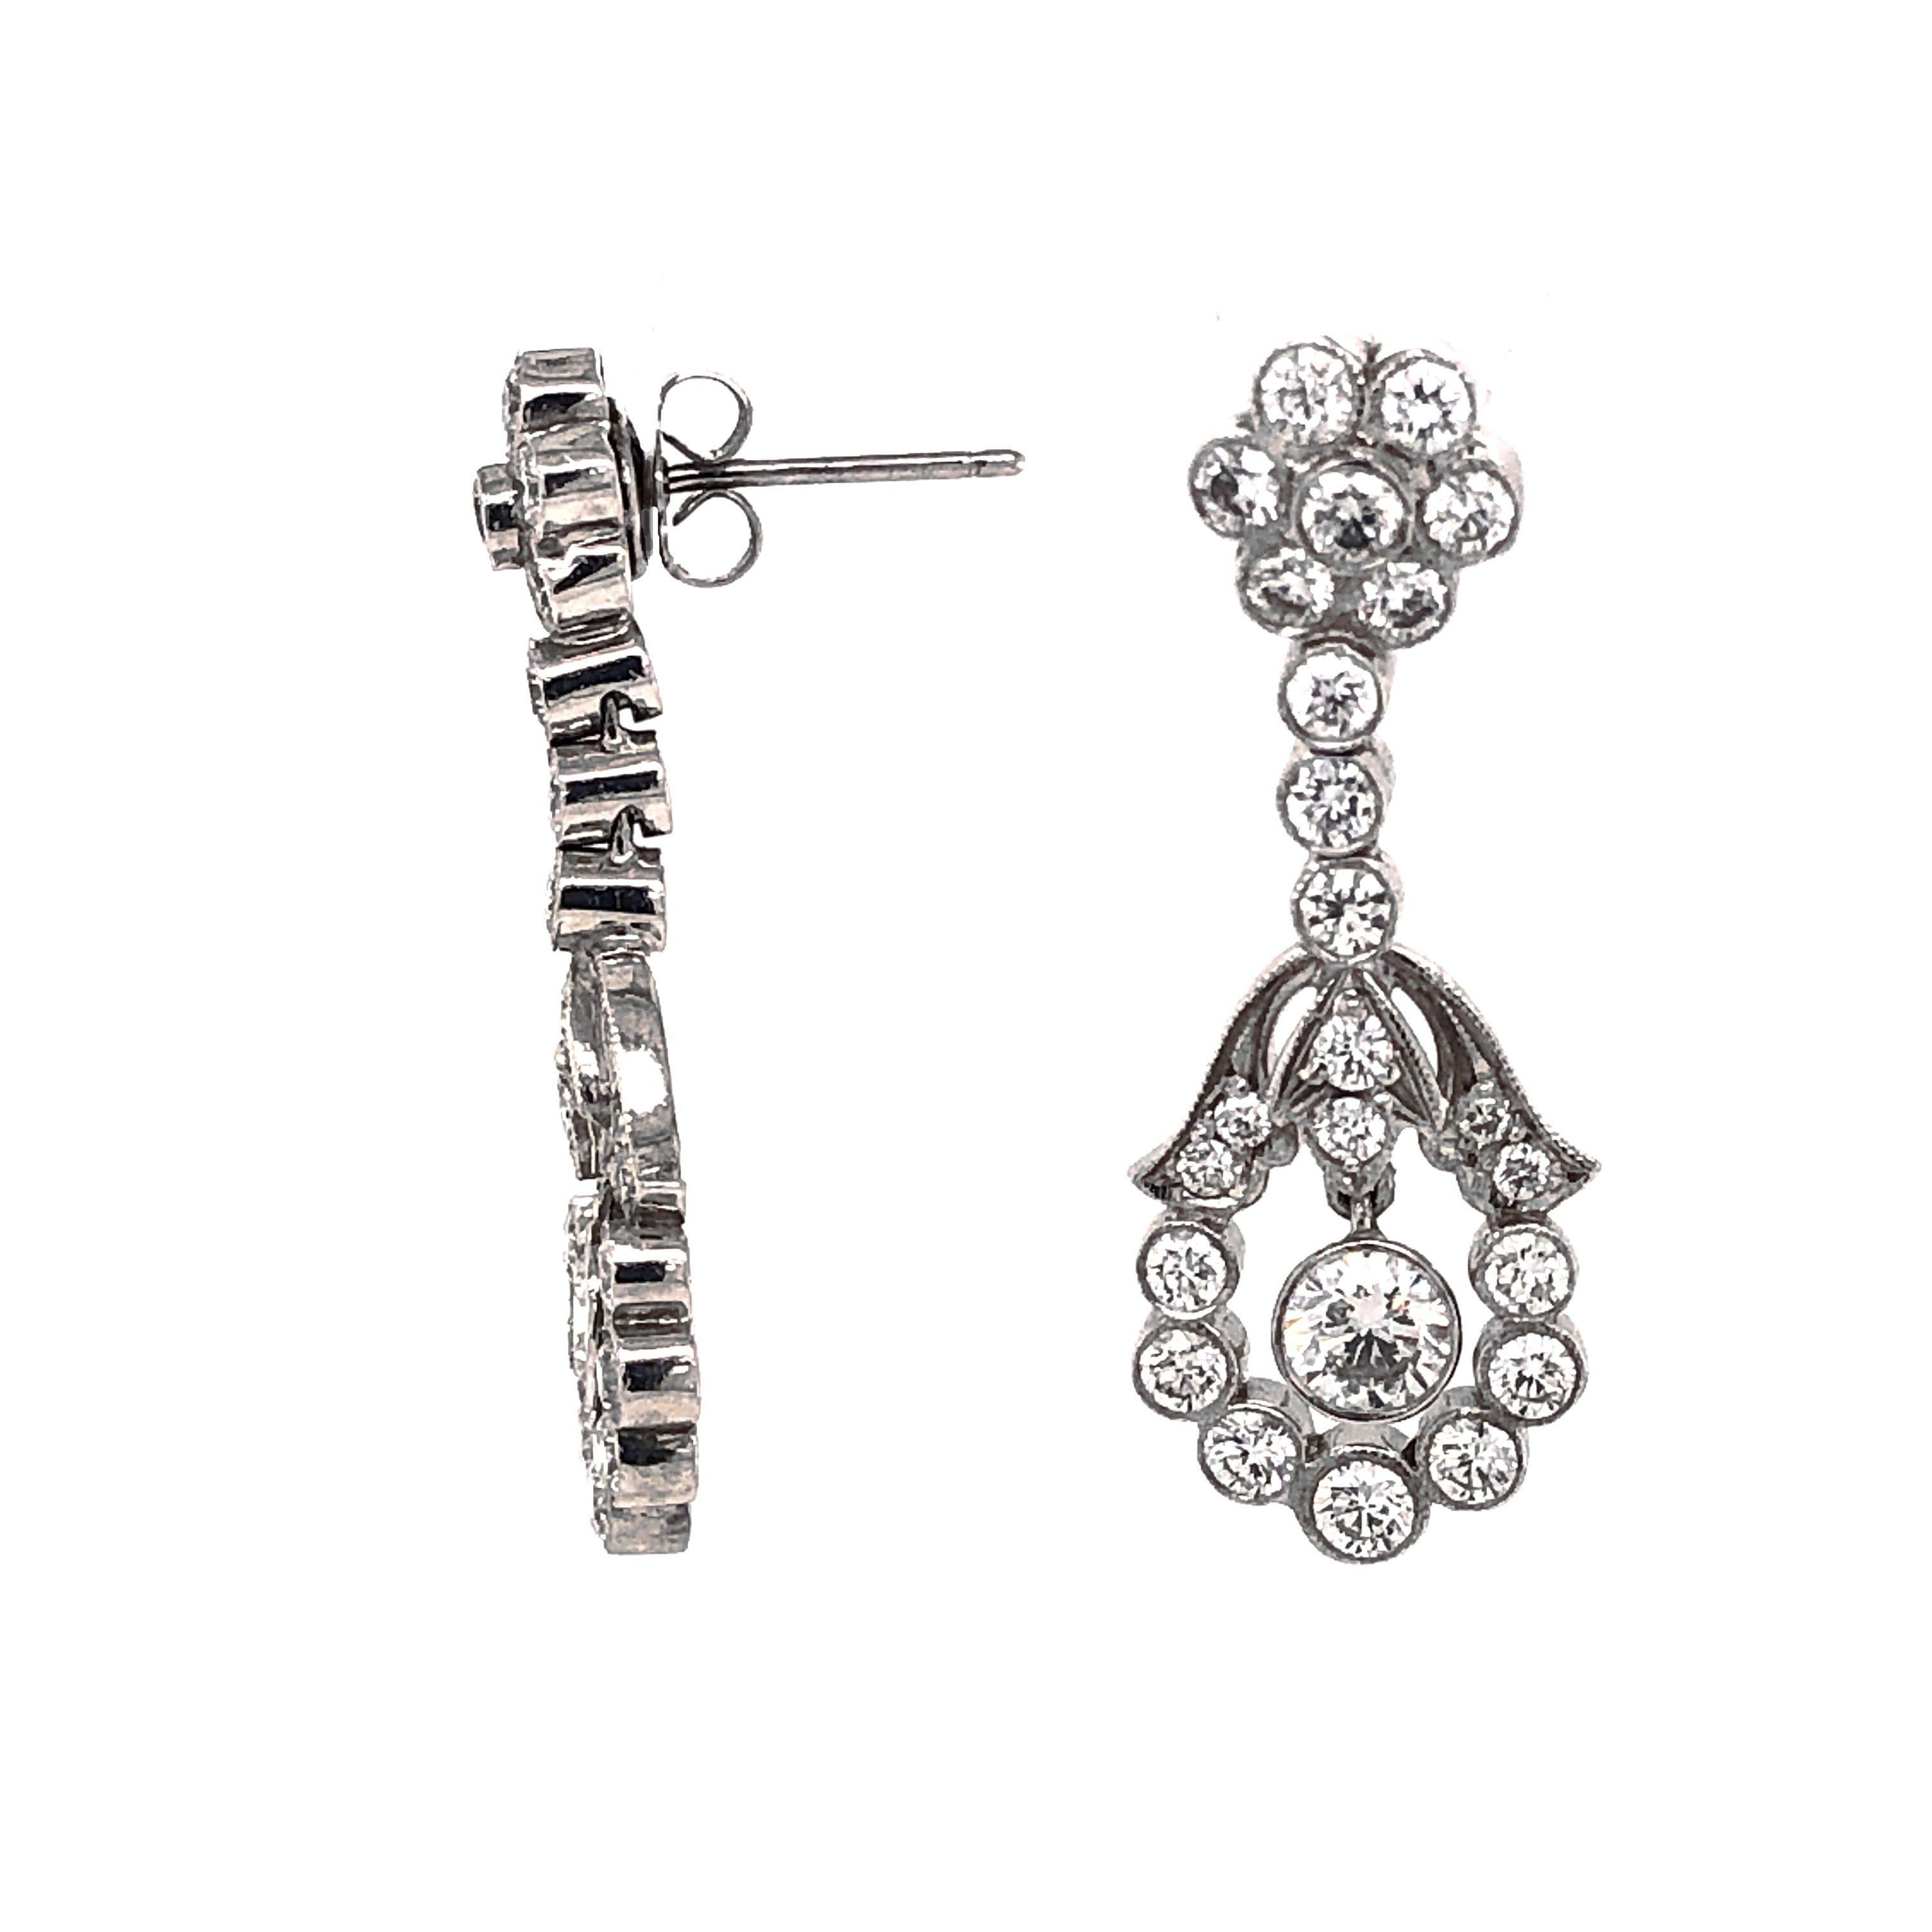 This dainty drop earrings holds round cut white diamonds 2.36 ct in total.
Diamonds are natural in G-H Color Clarity VS. 
Platinum 950 metal. 
Butterfly studs. 
Floral inspired design.
Width: 1.2 cm
Height: 3.5 cm
Weight: 11.47 g